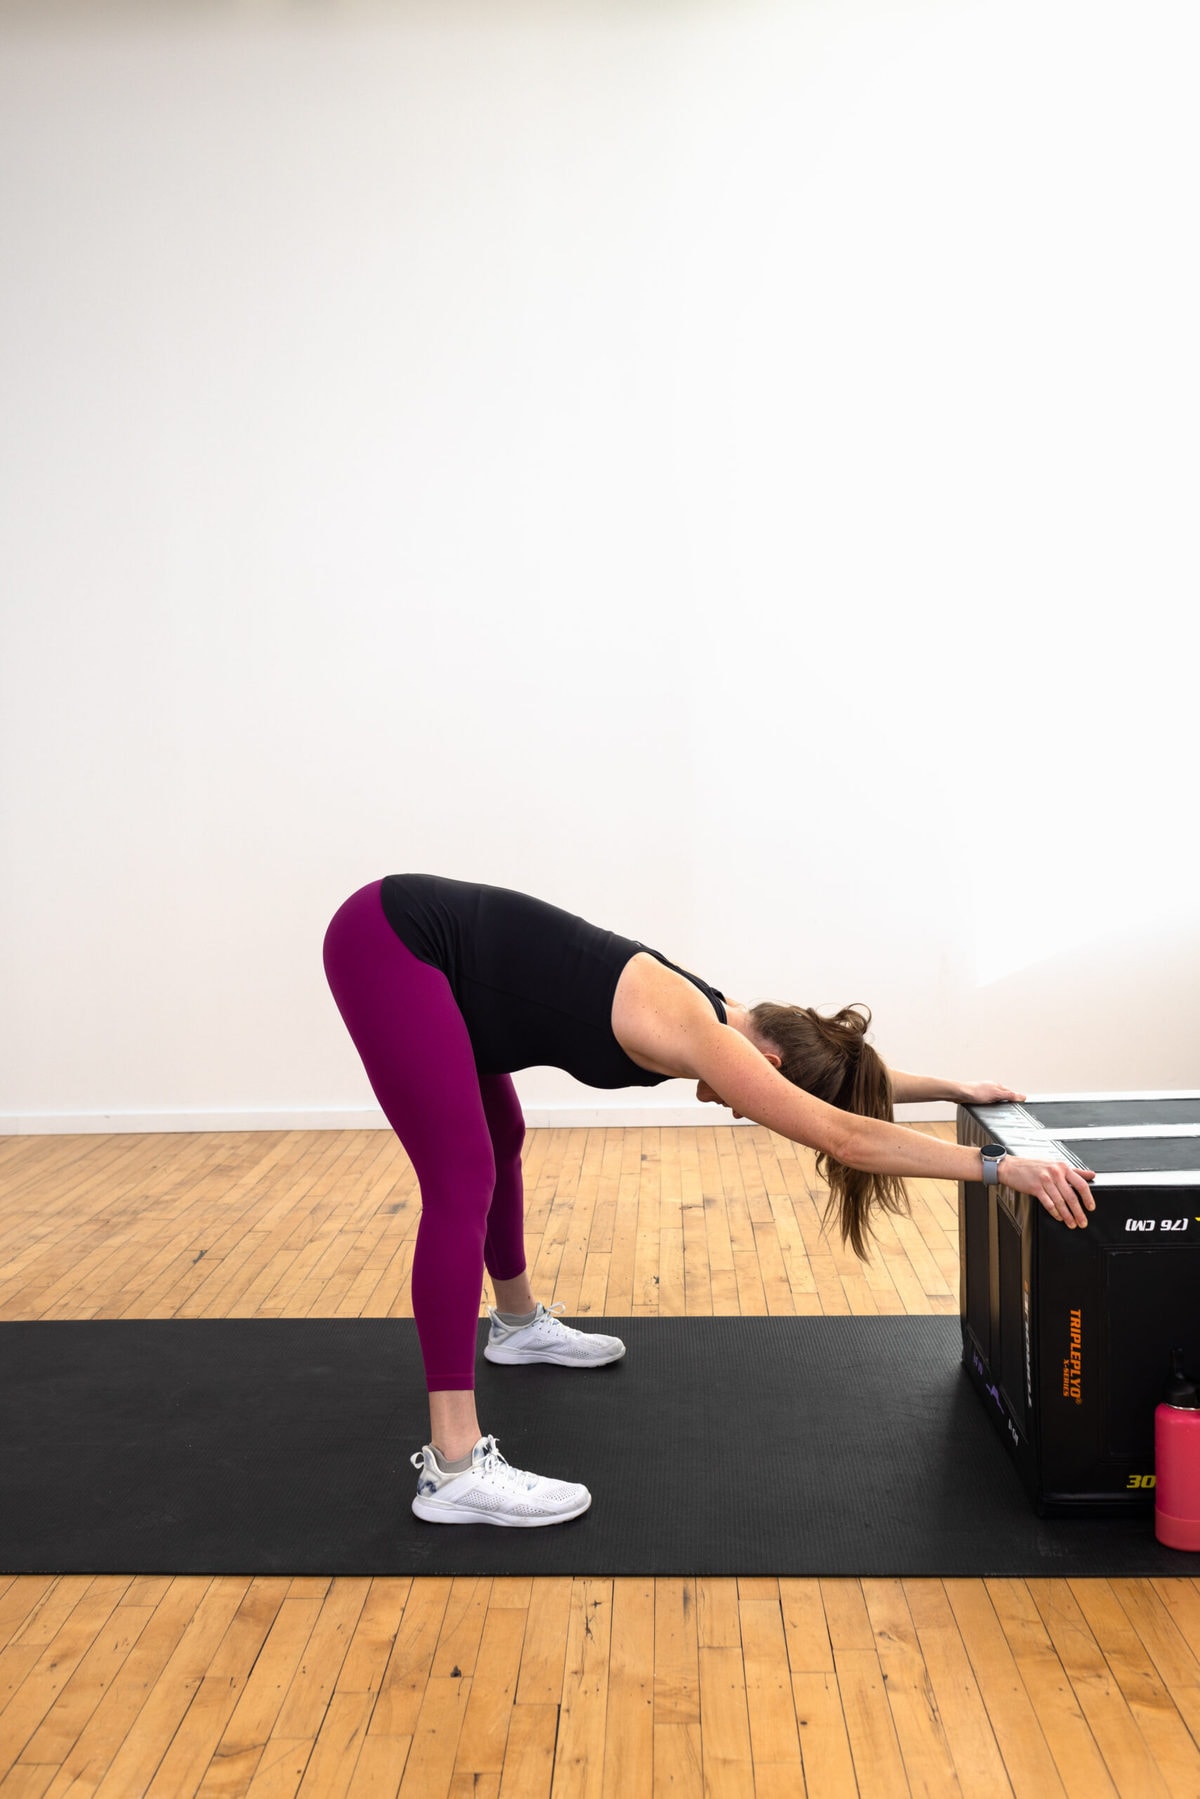 How to Do the Figure 4 Stretch to Relieve Tight Hips